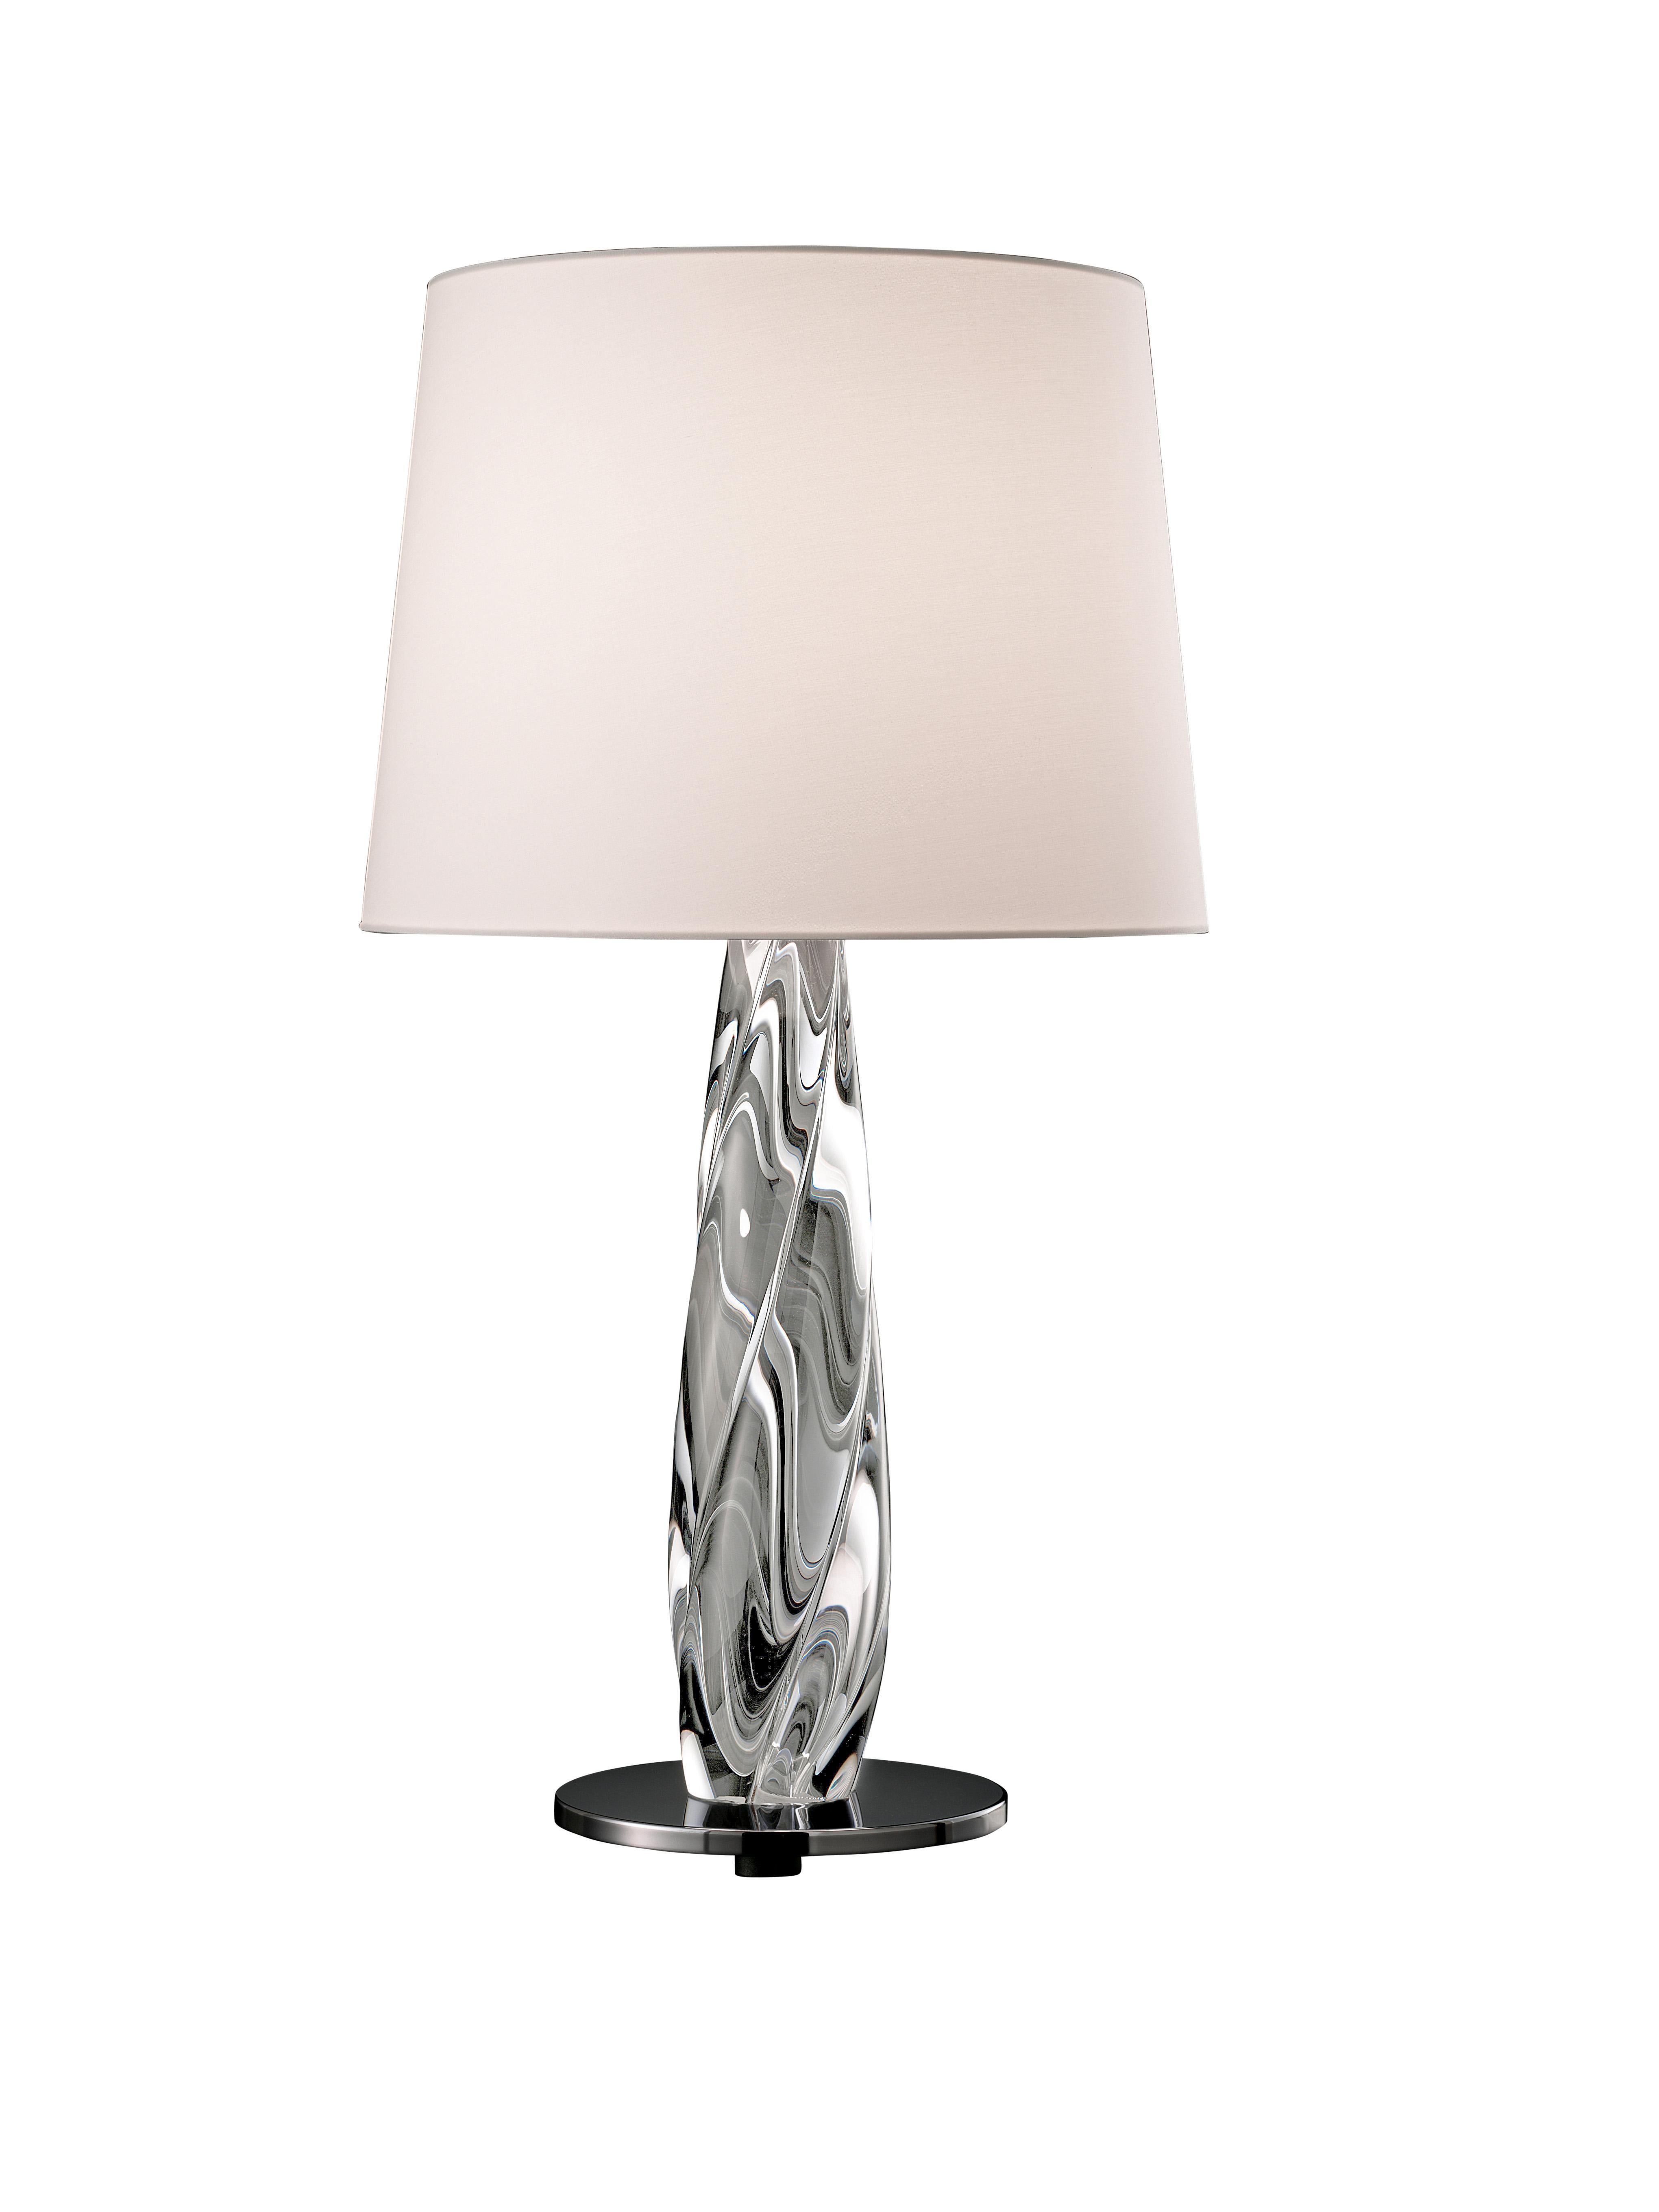 Twins 7224 Table Lamp in Glass with White Shade and Chrome, by Barovier&Toso